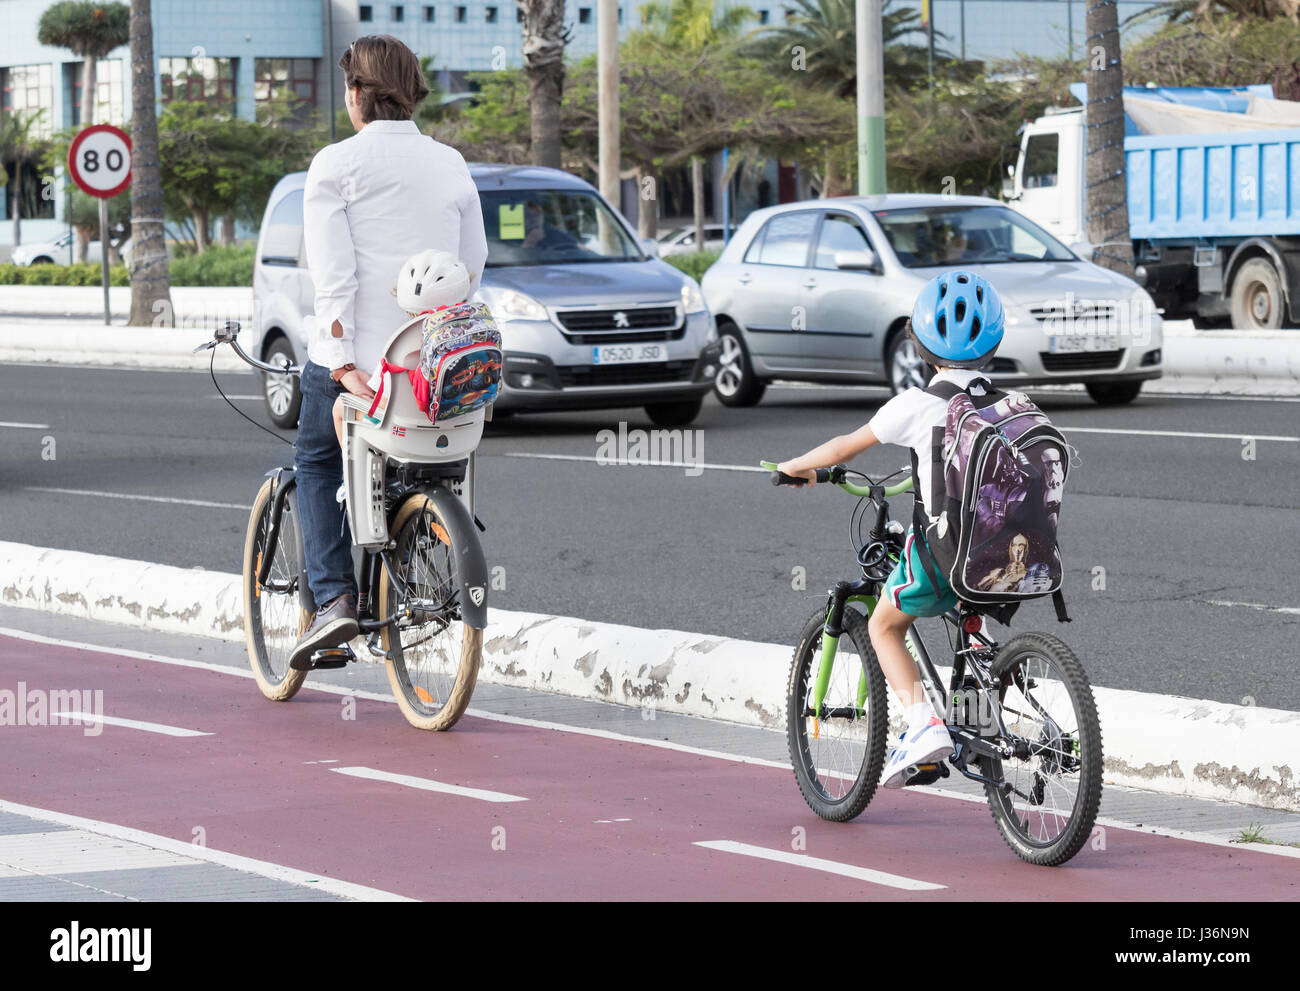 Young boy in school uniform riding to school on bicycle behind adult who is carrying small child. Stock Photo